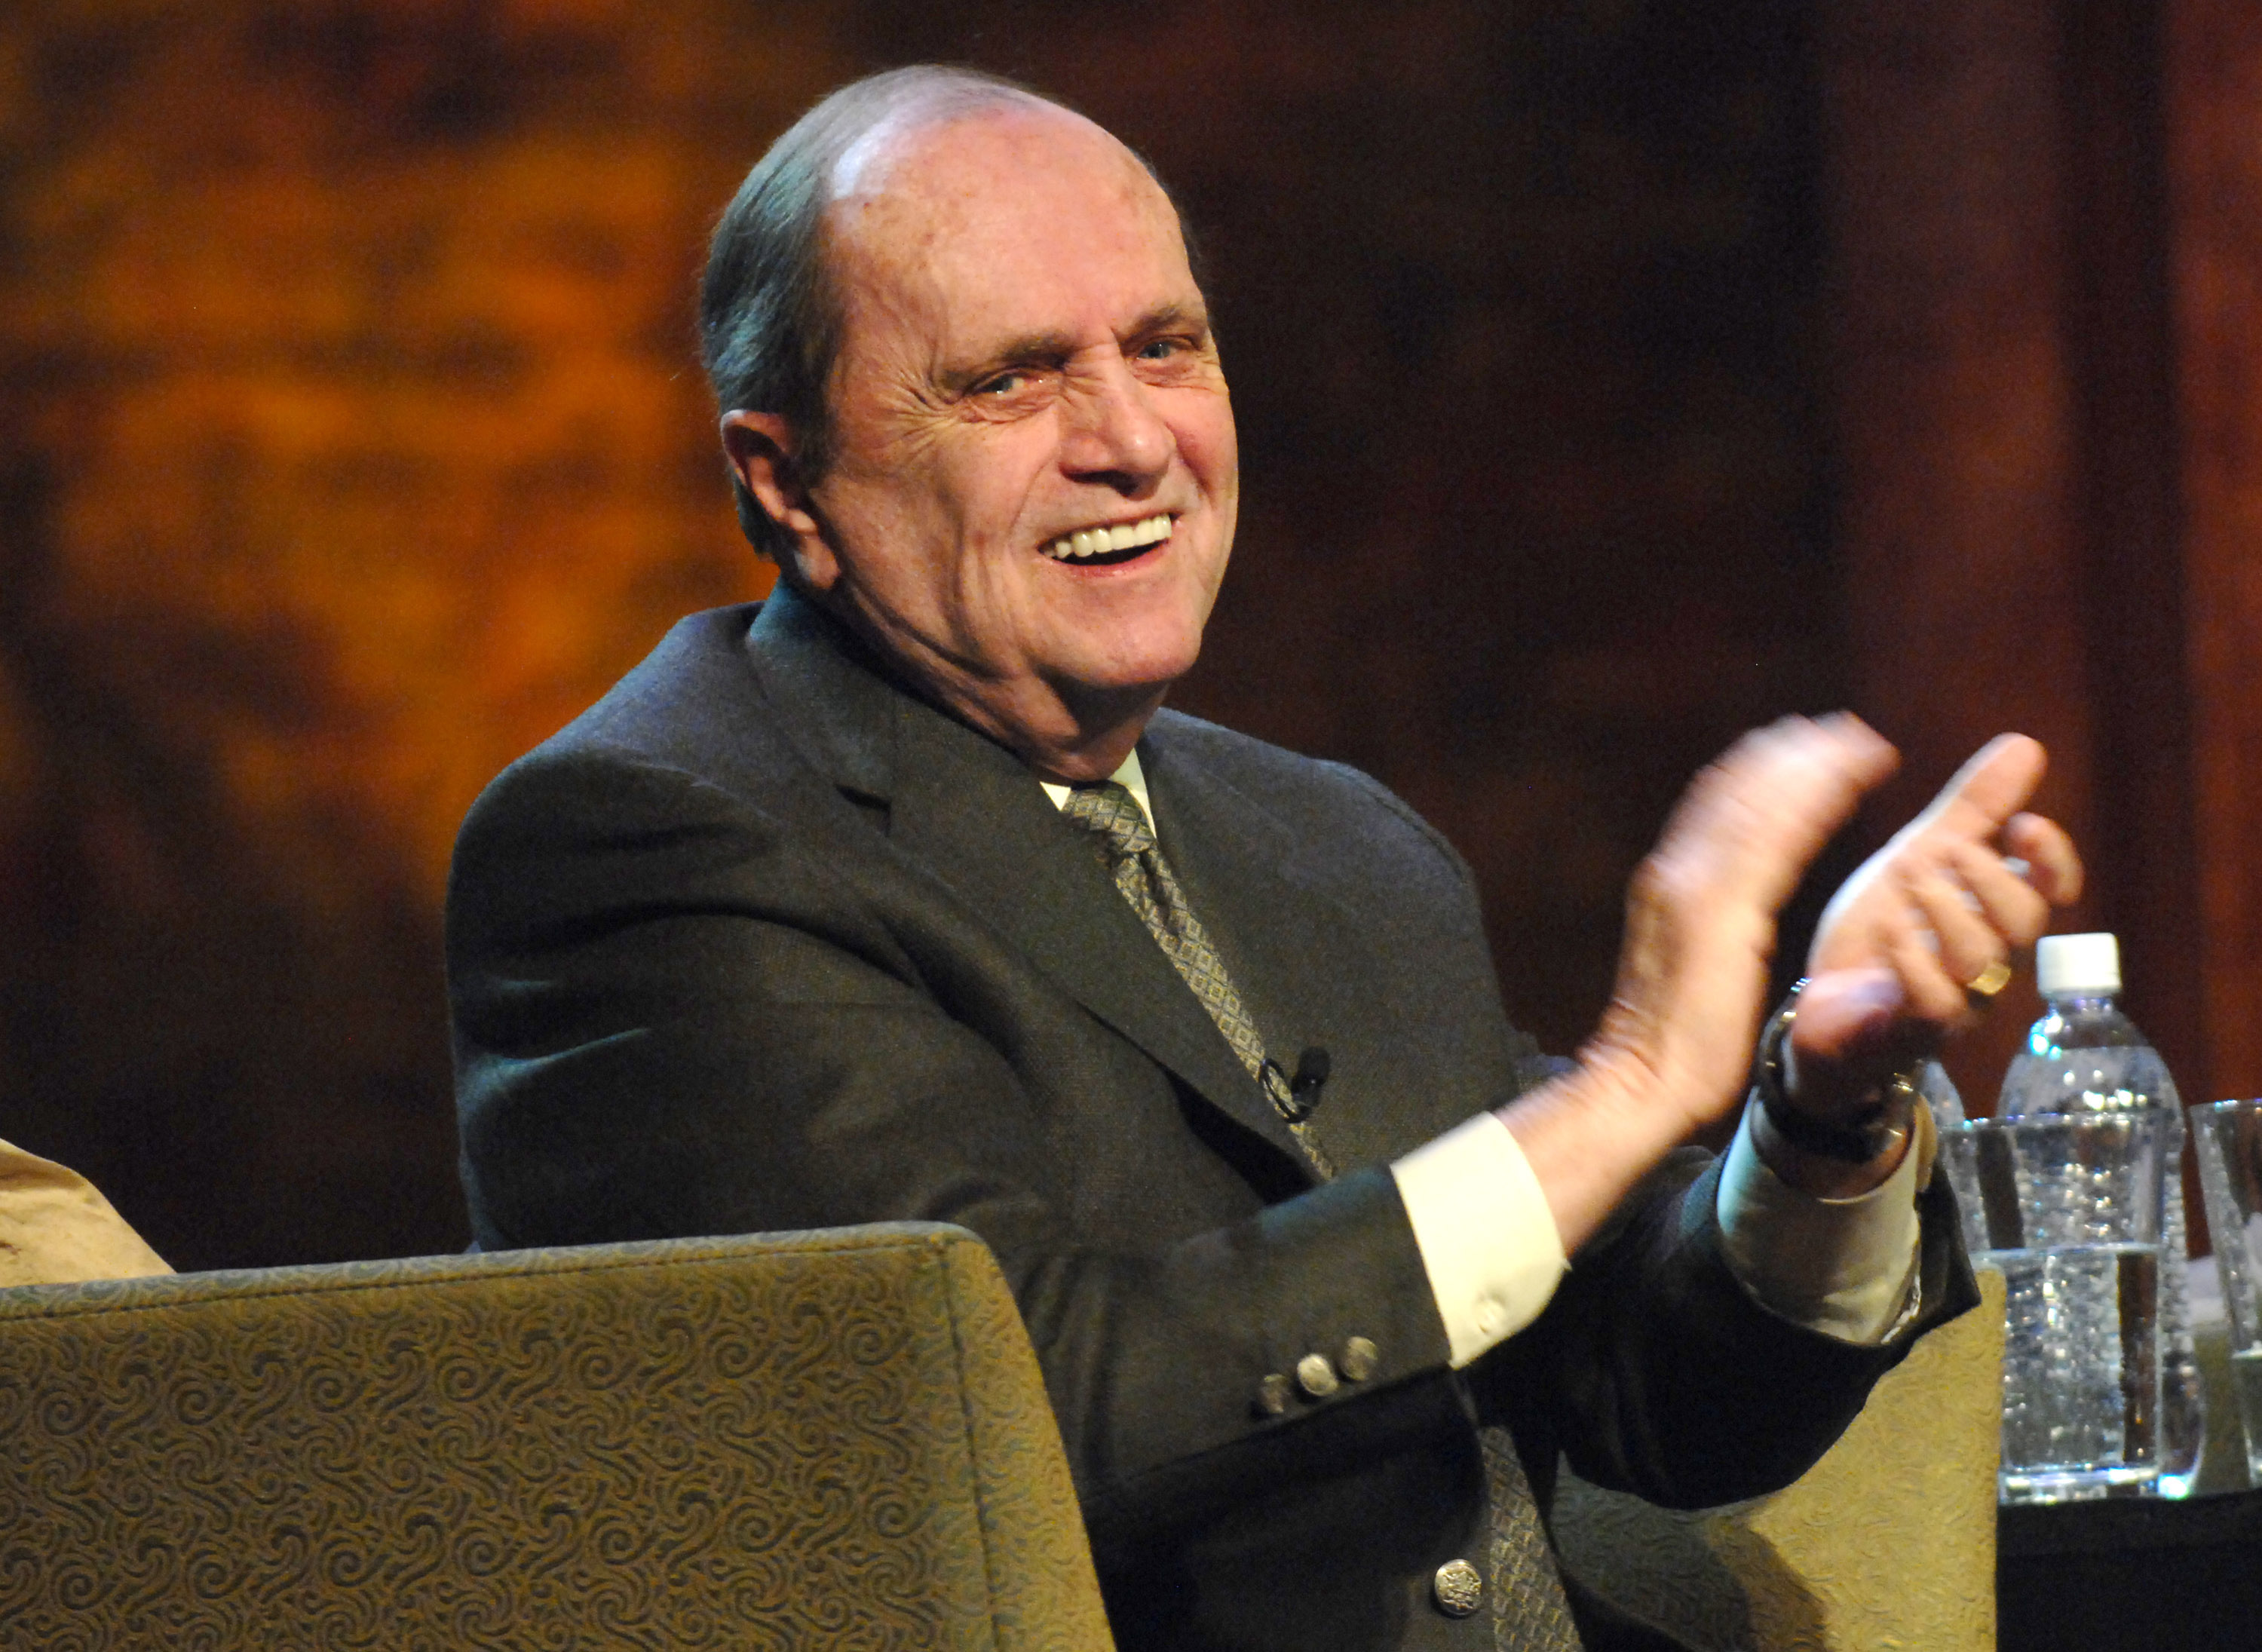 Bob Newhart during HBO's 13th Annual U.S. Comedy Arts Festival at Wheeler Opera House on March 1, 2007 in Aspen, Colorado | Source: Getty Images